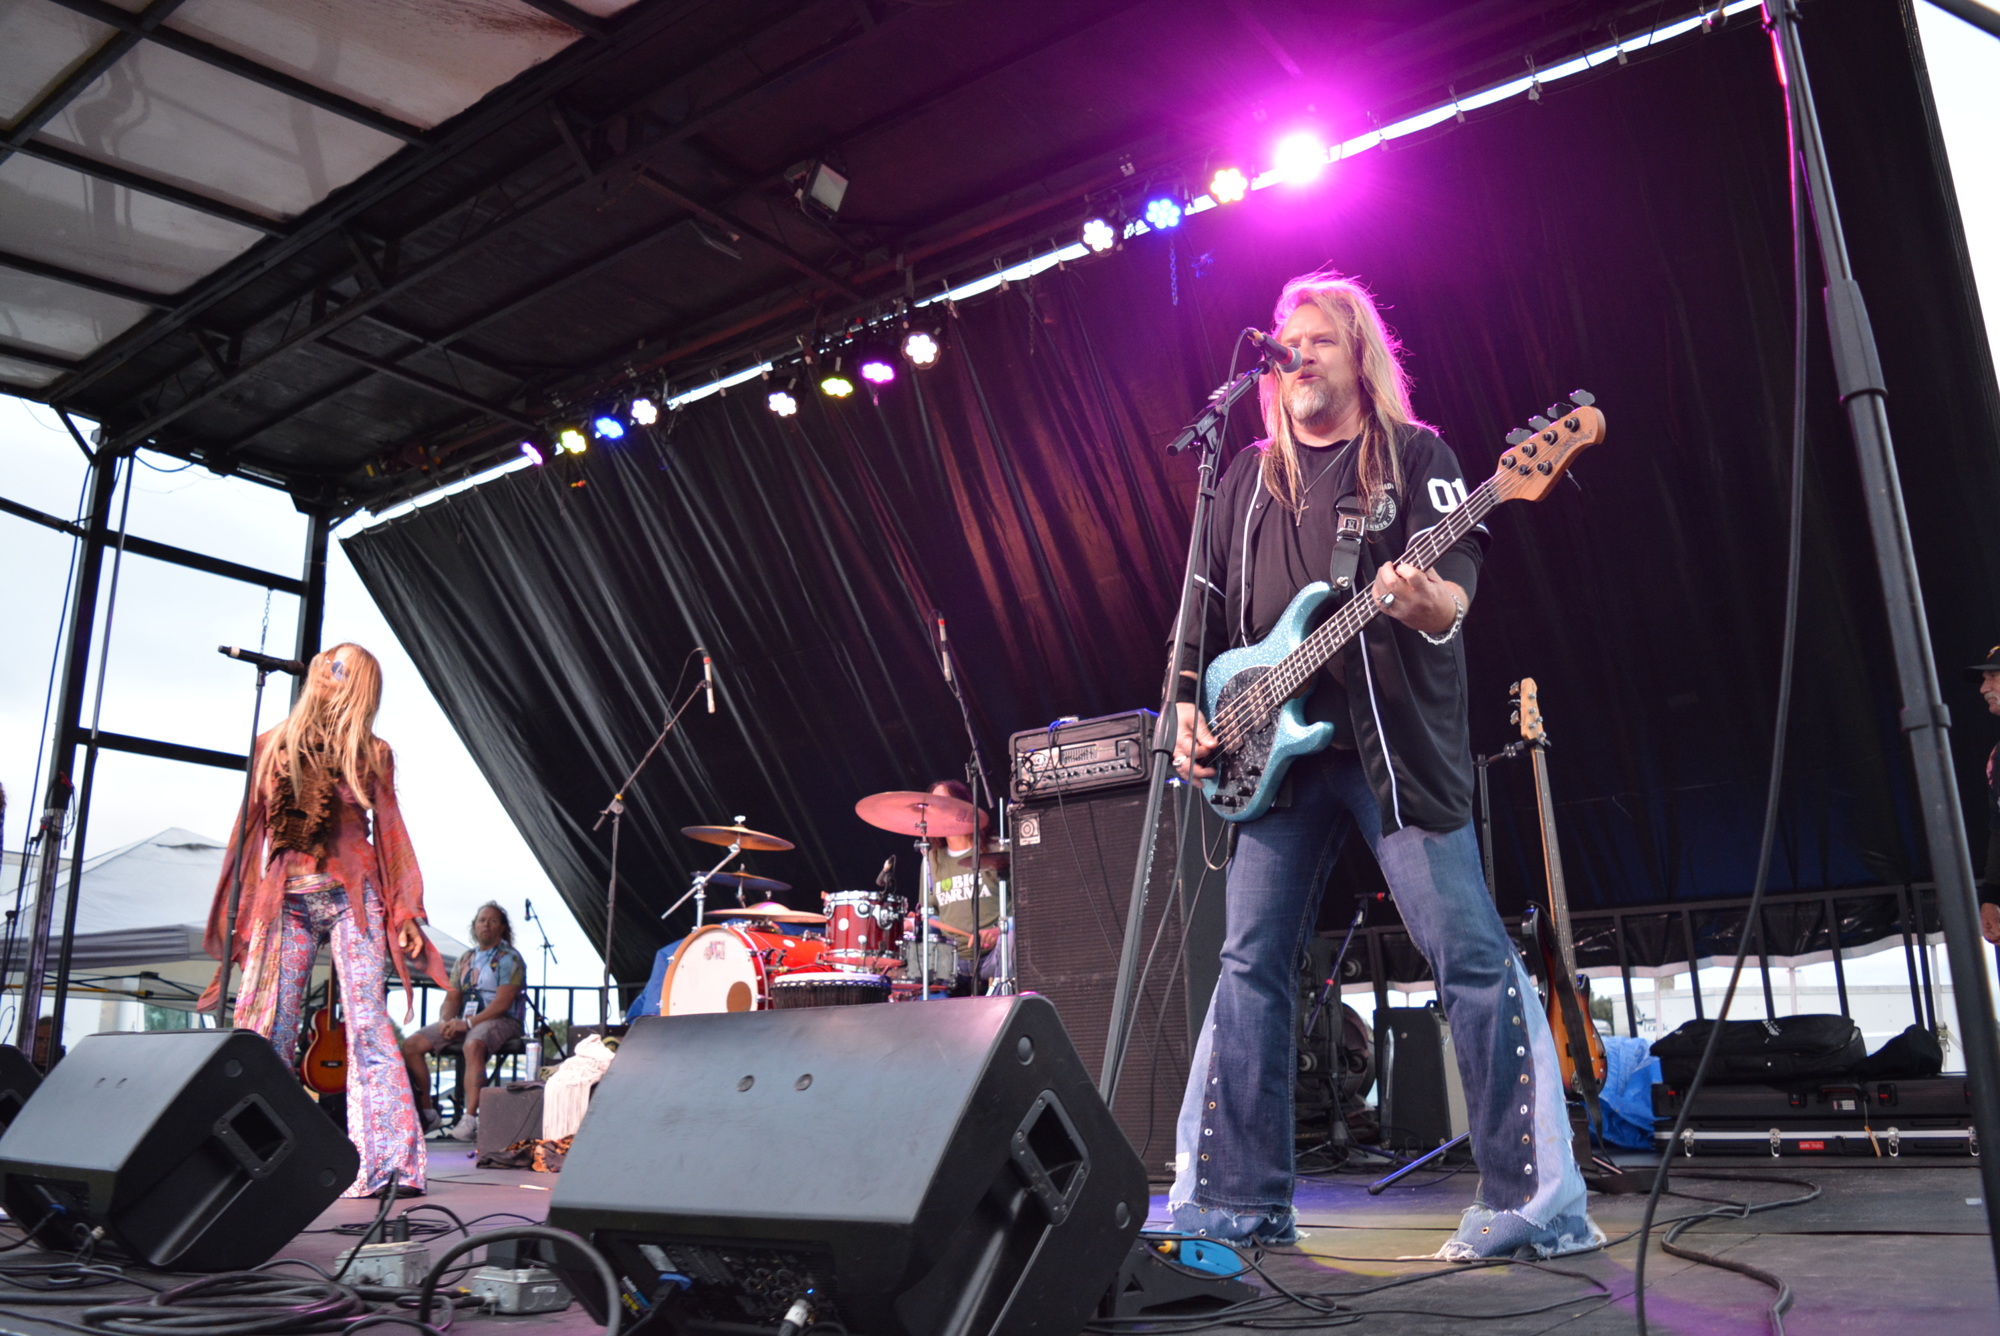 Bands such as Twinkle and Rock Soul Radio  performed Nov 23 during the Giving Hunger the Blues Festival, held for the first time at the Sarasota Polo Club.